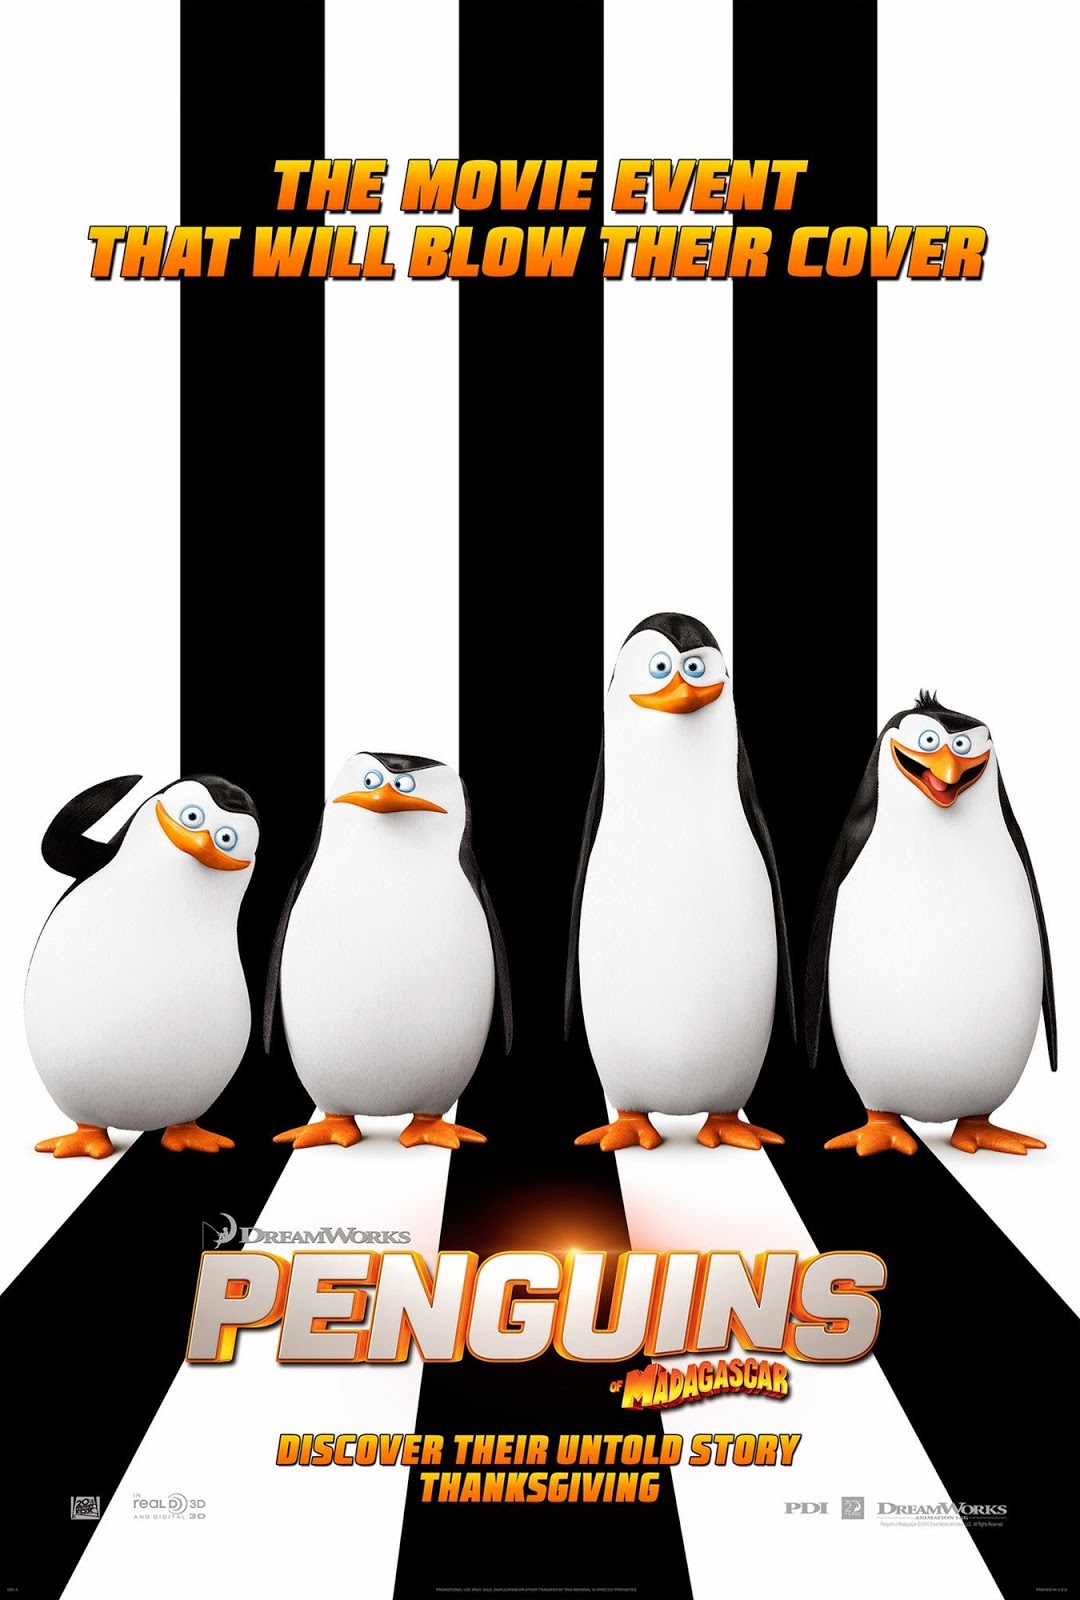 Animated Penguin Pictures Posted By Zoey Simpson